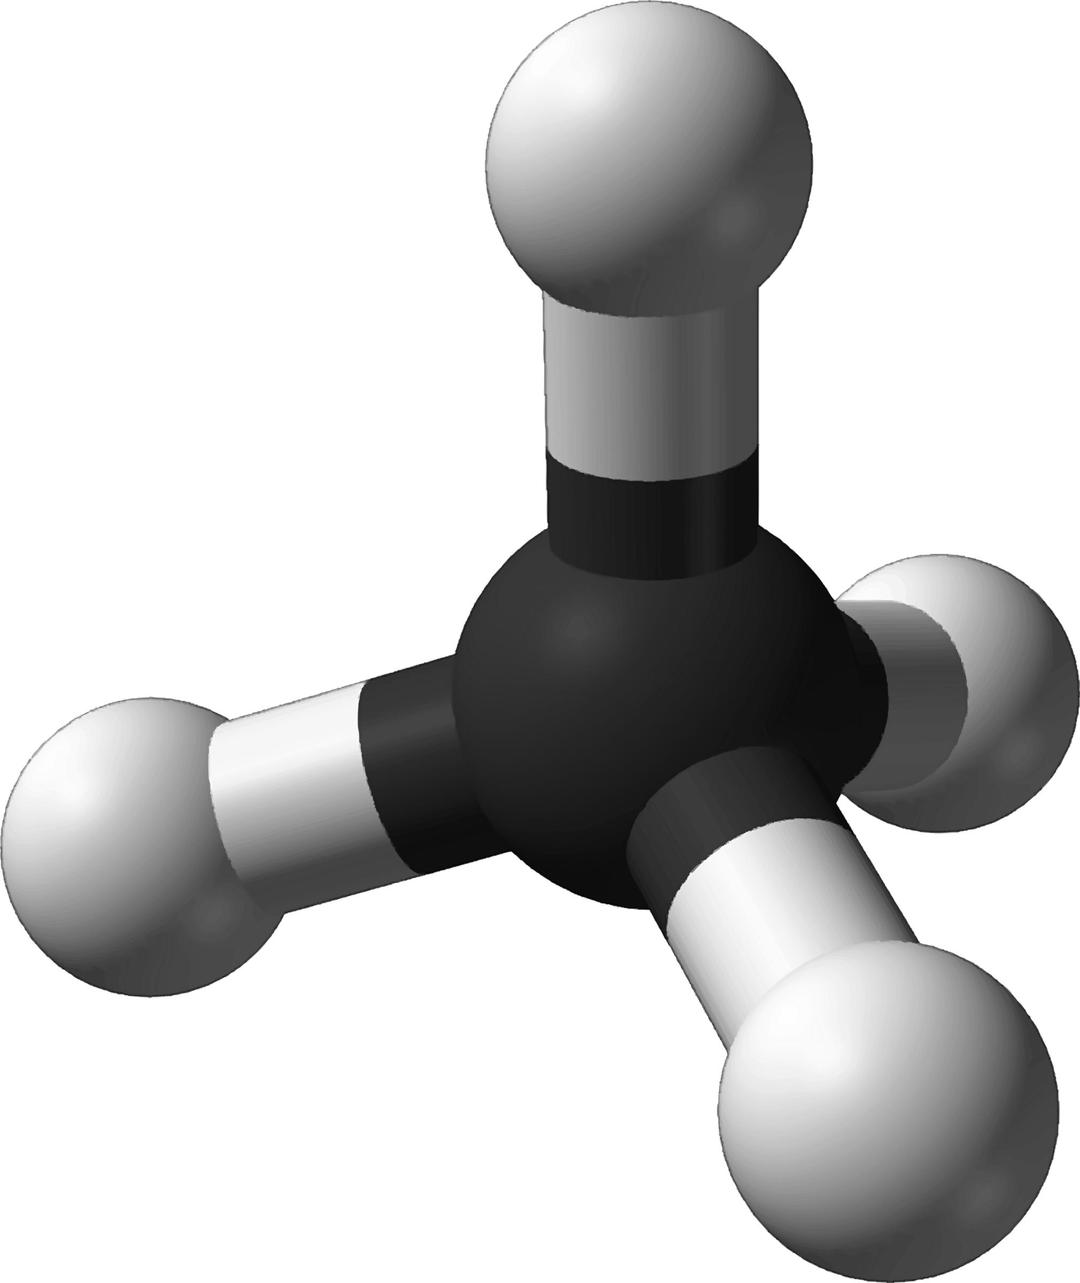 Famous (and infamous) molecules 15 - methane png transparent